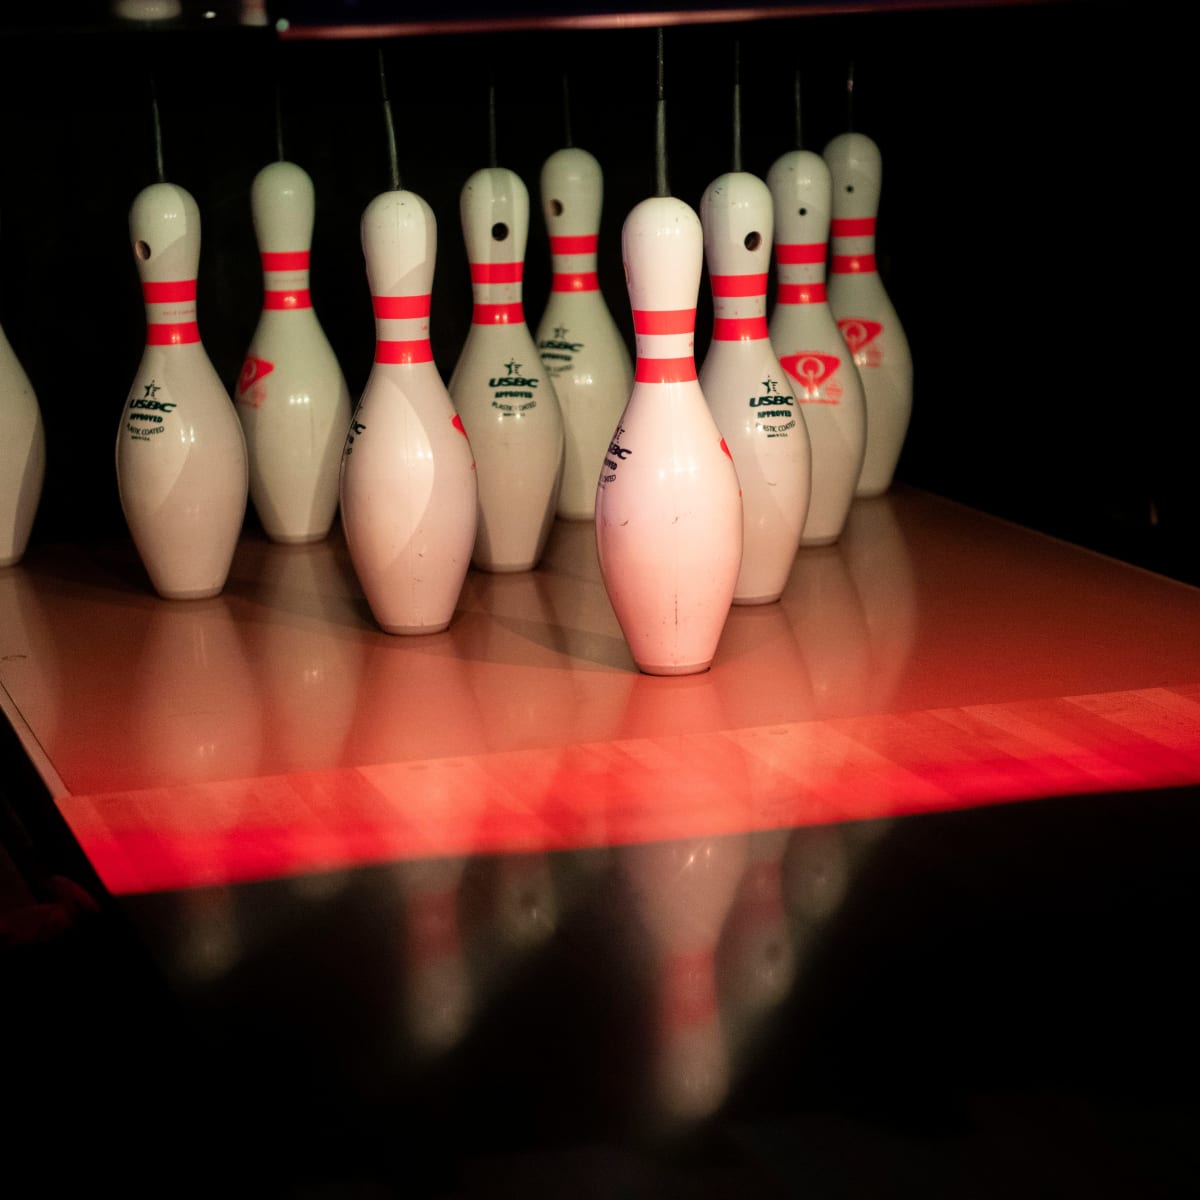 Watch Tour Championship Stream PWBA bowling live, TV channel - How to Watch and Stream Major League and College Sports